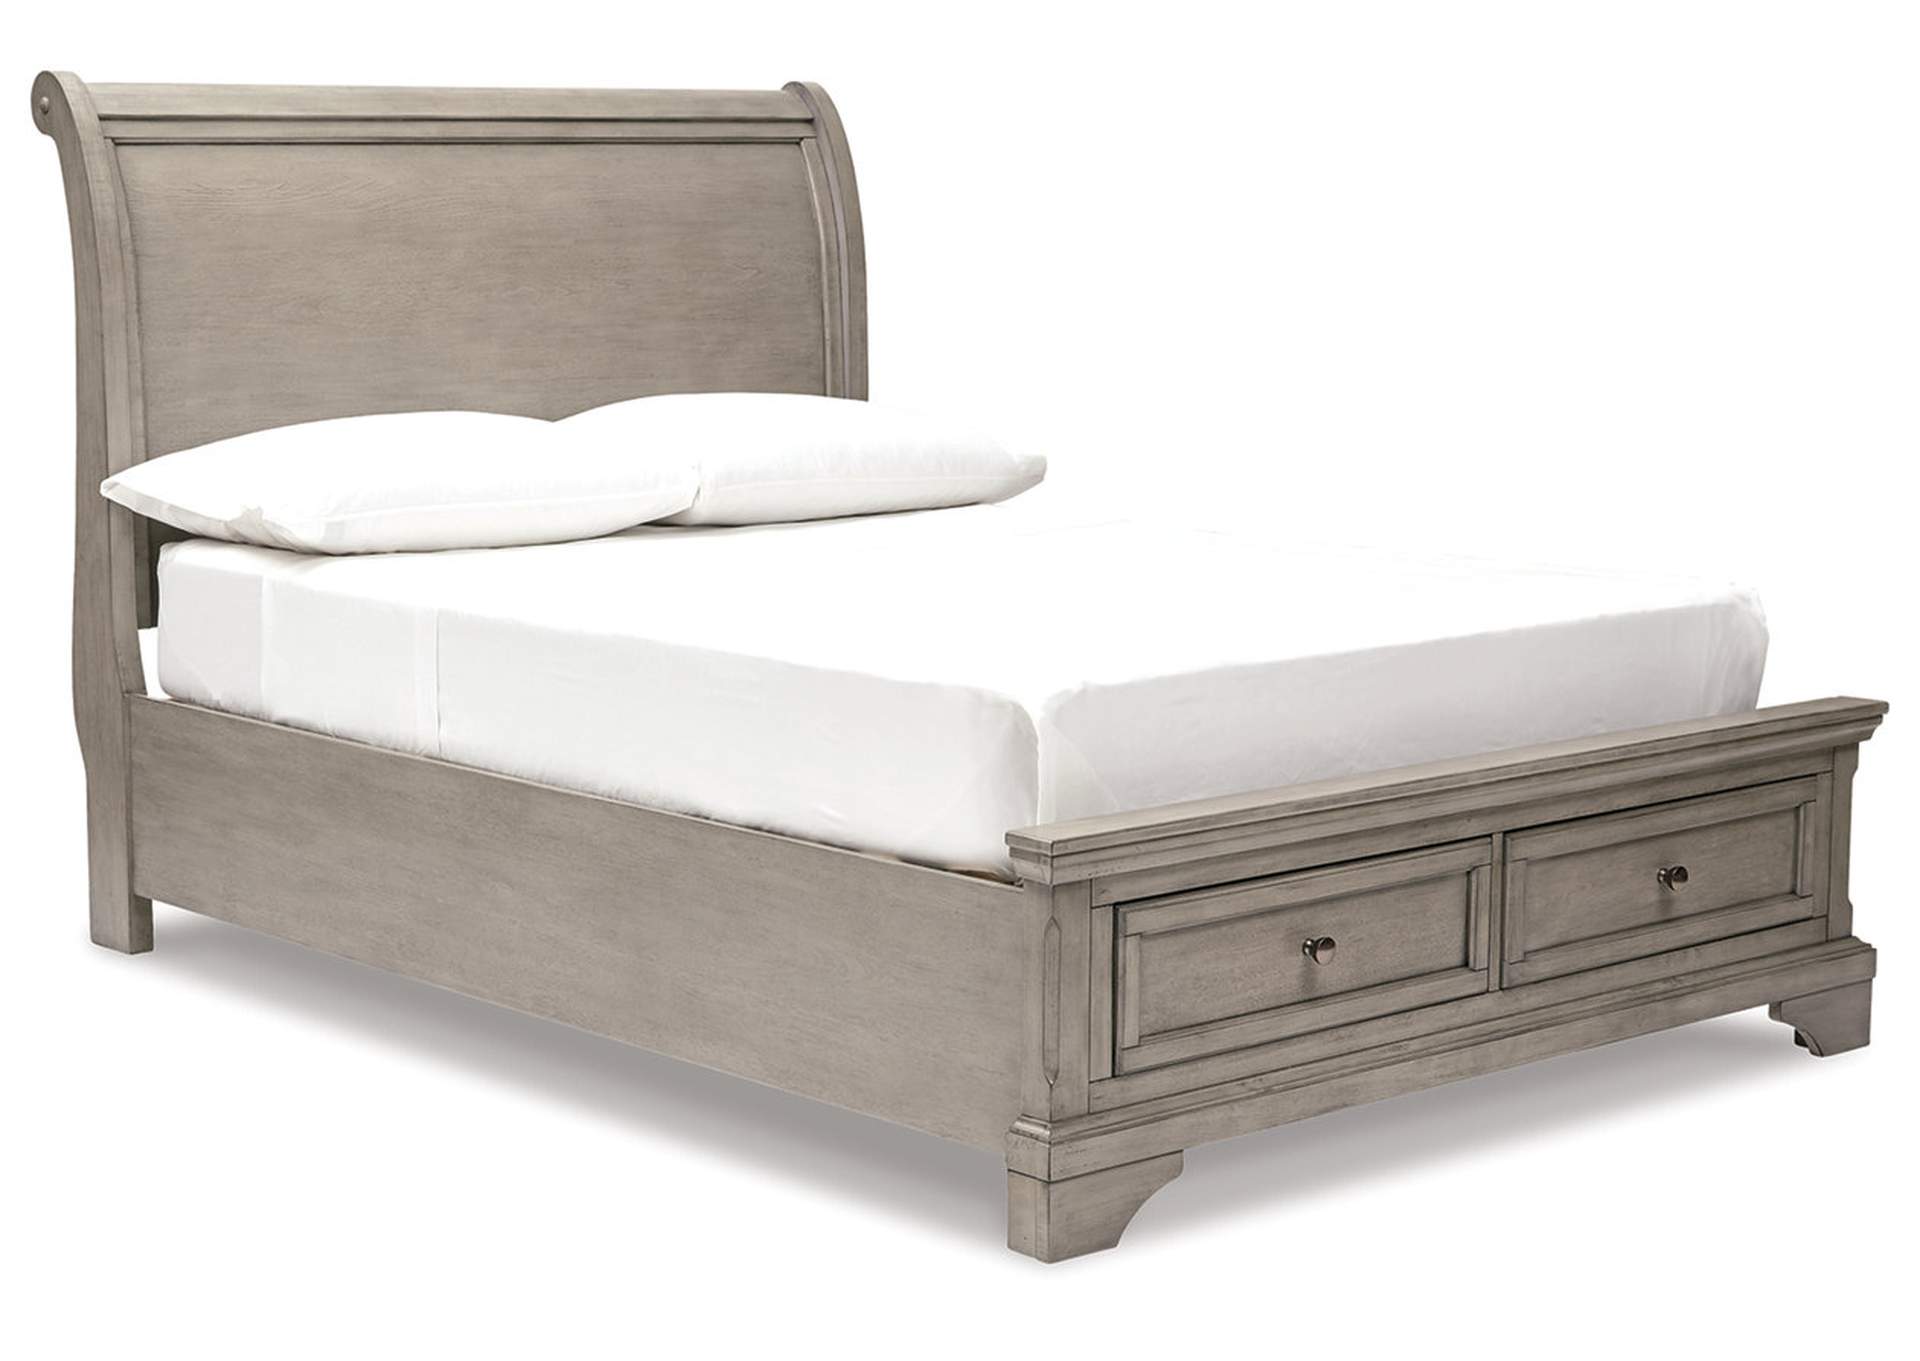 Lettner Full Sleigh Bed with Mirrored Dresser and Chest,Signature Design By Ashley